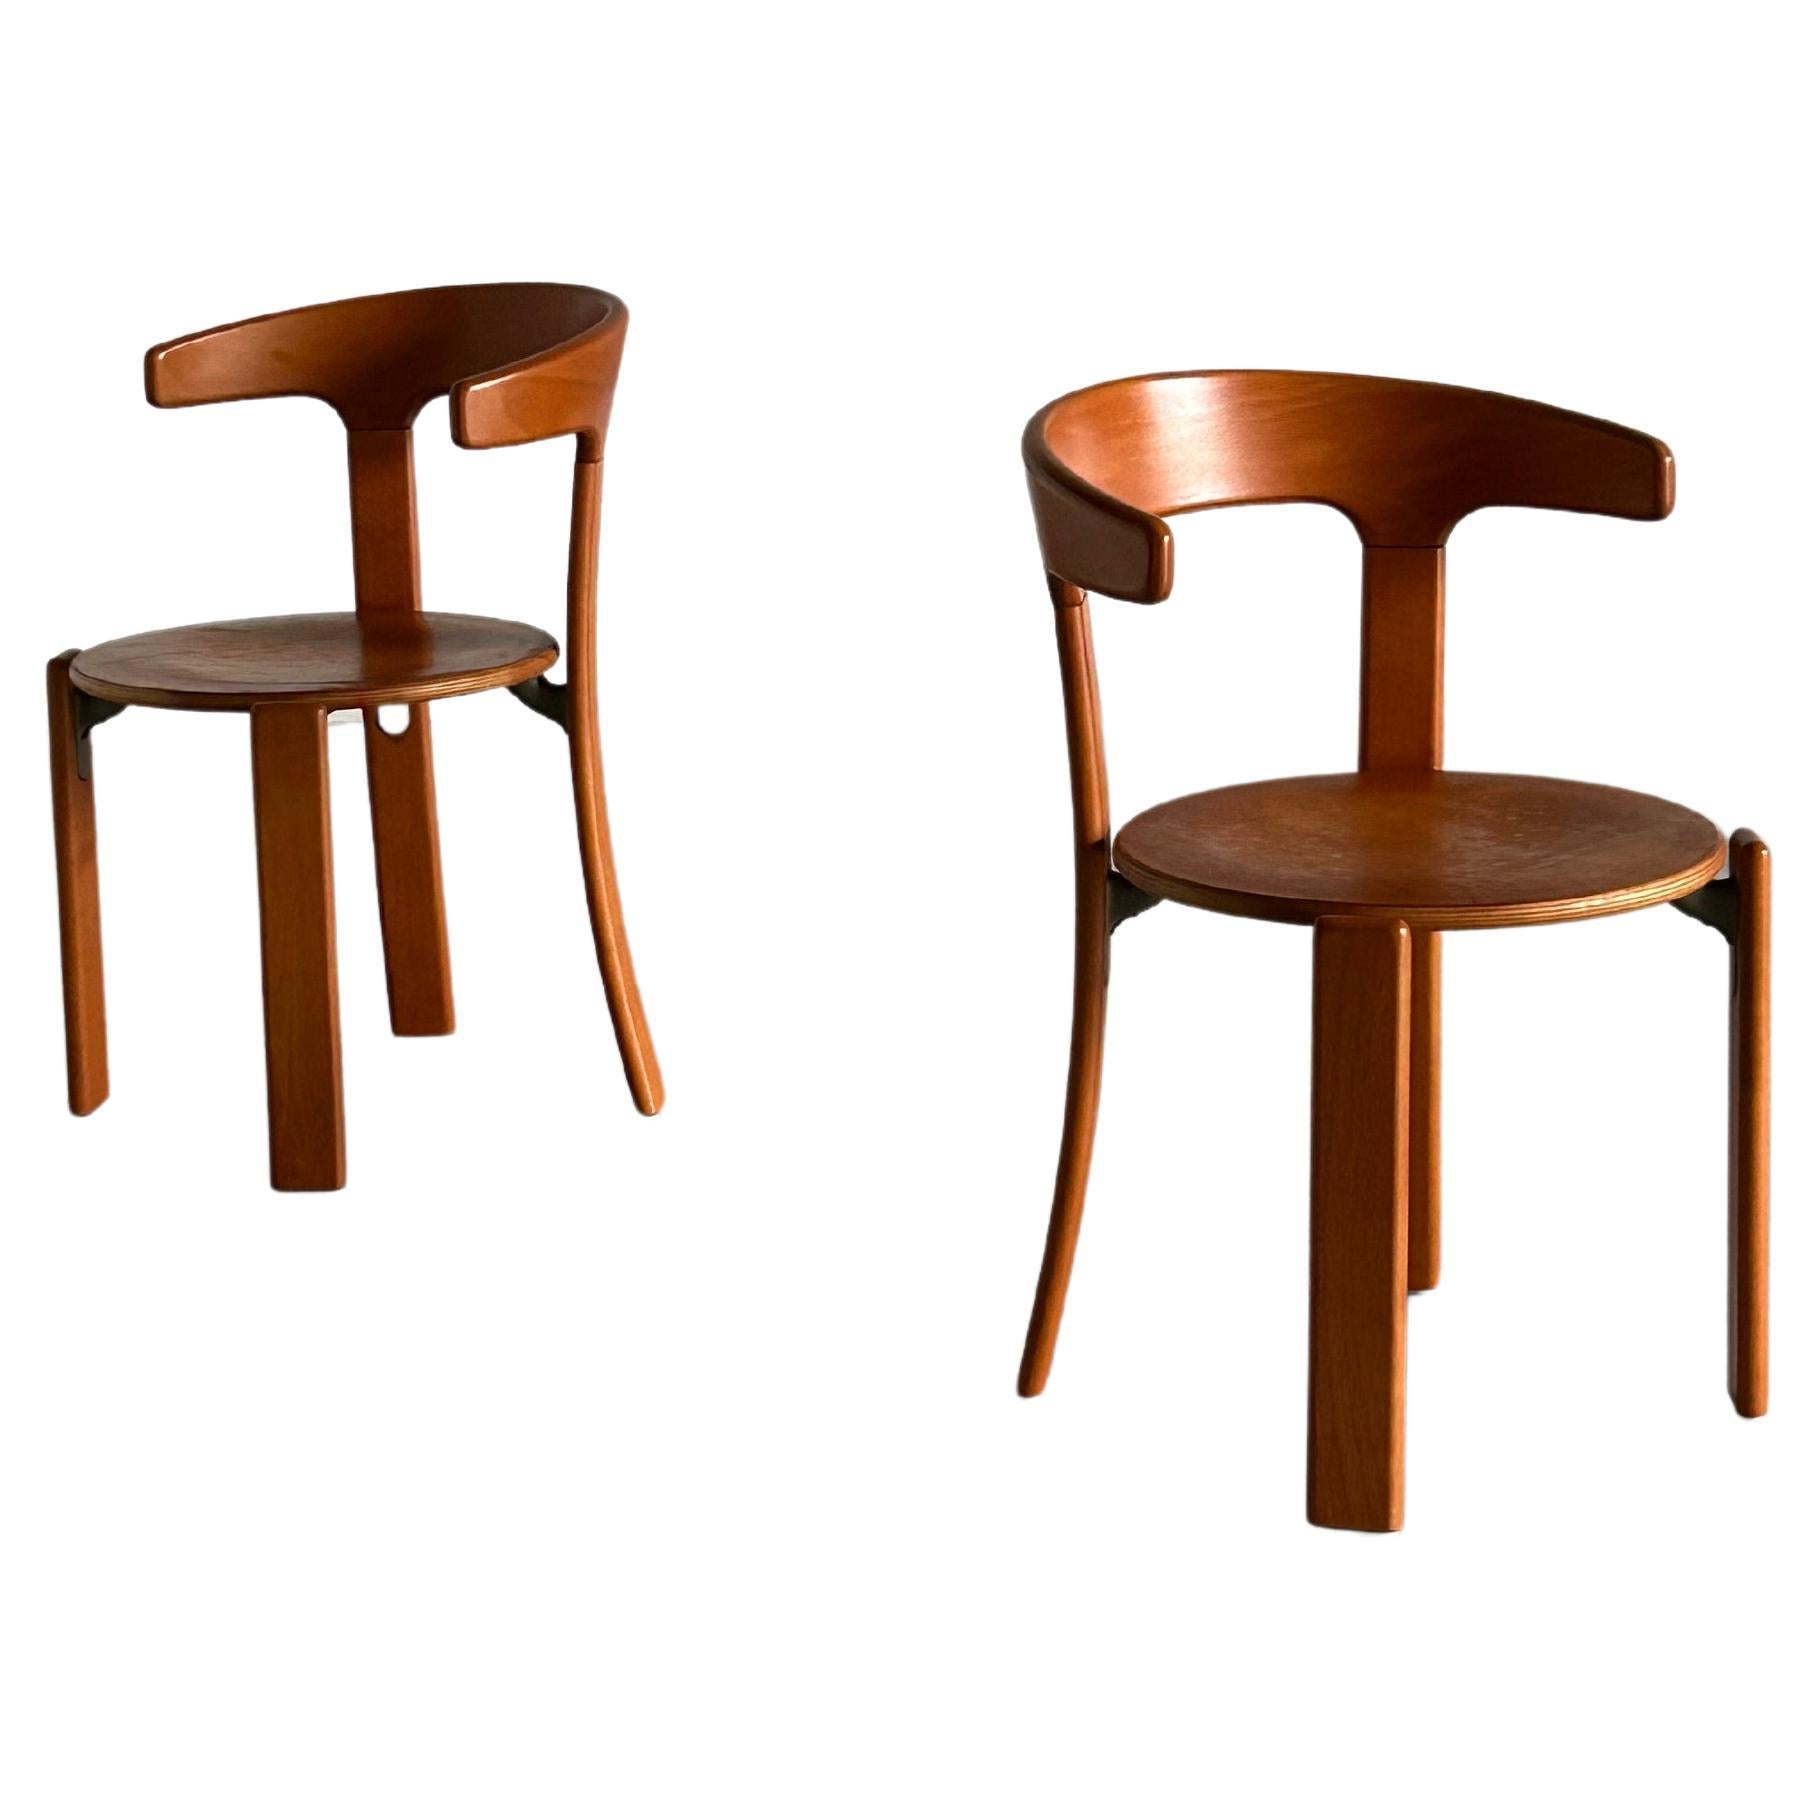 Kusch+Co. Dining Room Chairs